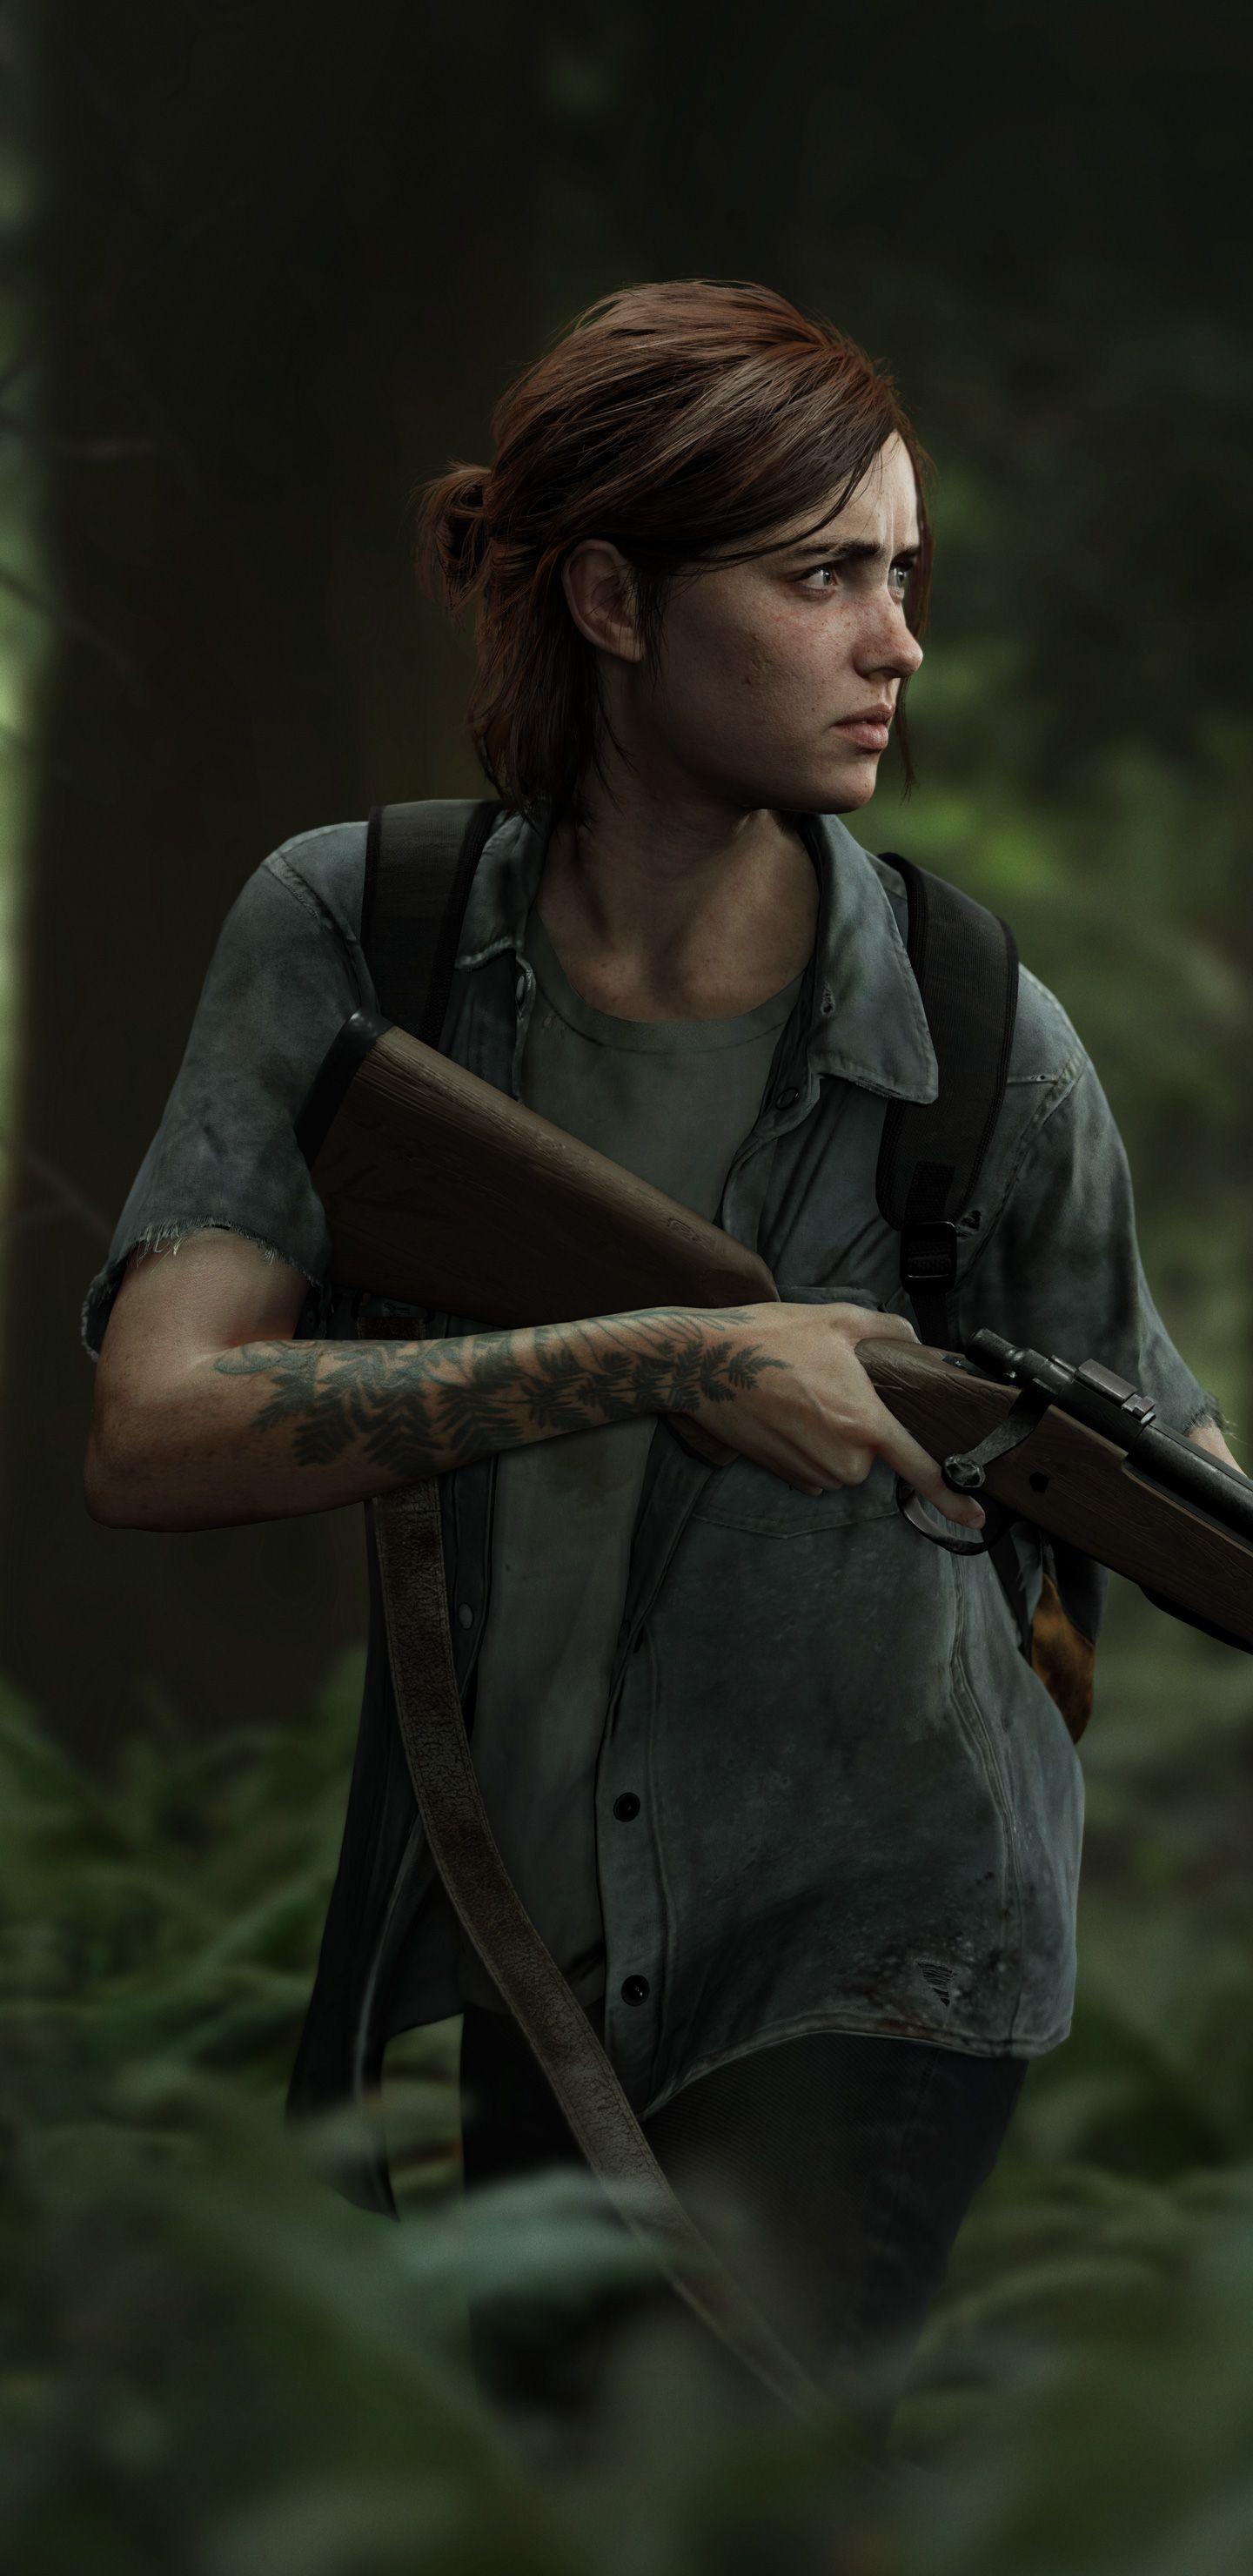 The Last of Us Mobile Wallpapers - Top Free The Last of Us Mobile